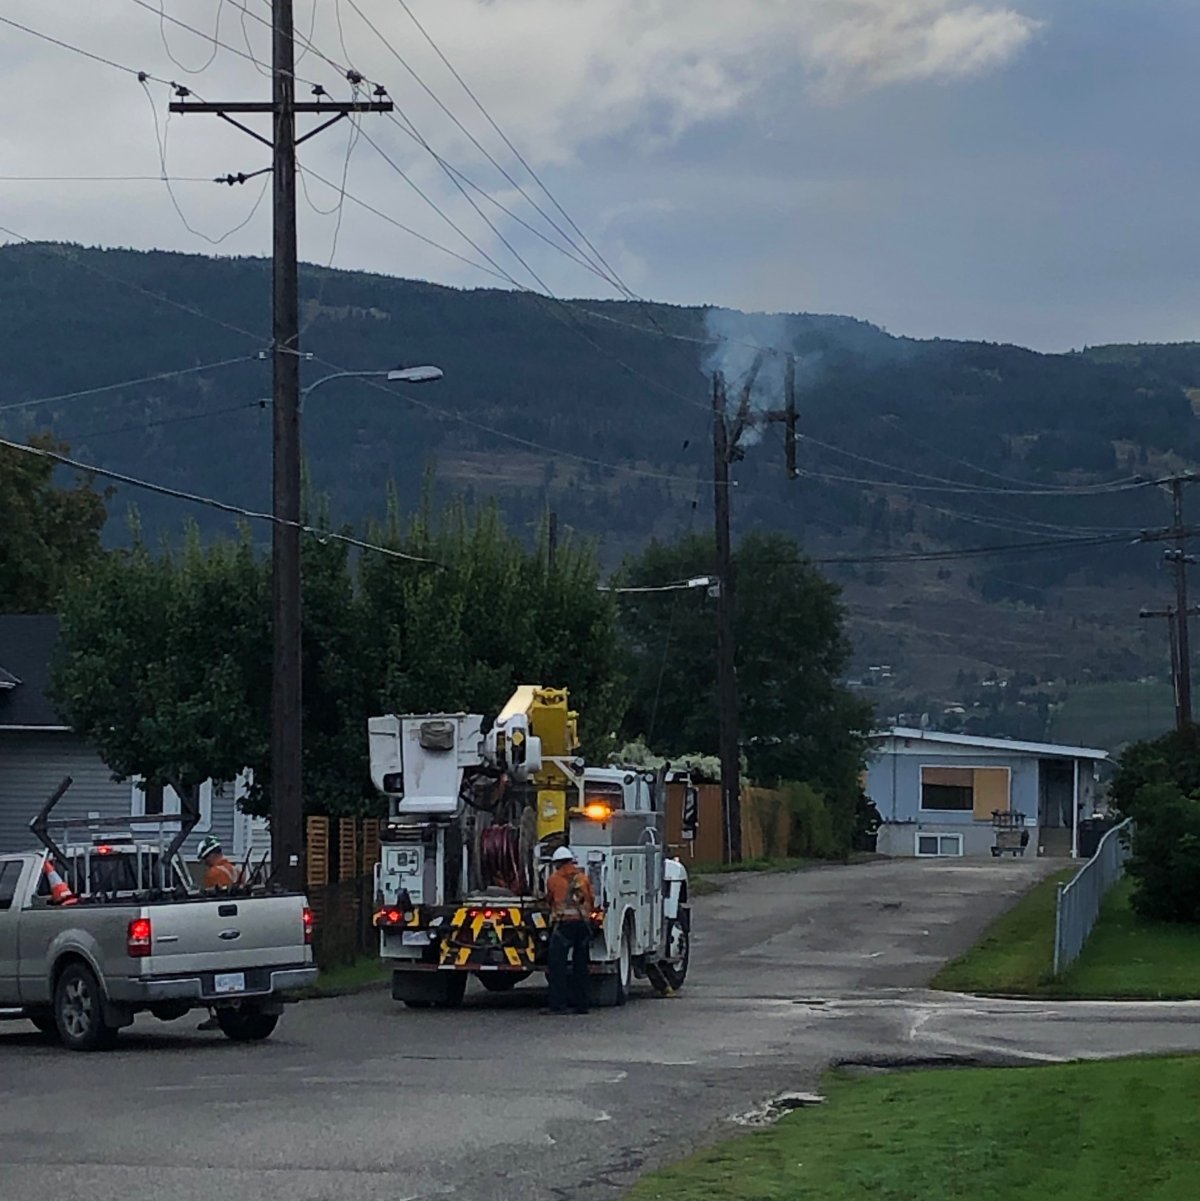 B.C. Hydro said it was a burnt power pole that originally knocked out two major power lines leading to the outage.  